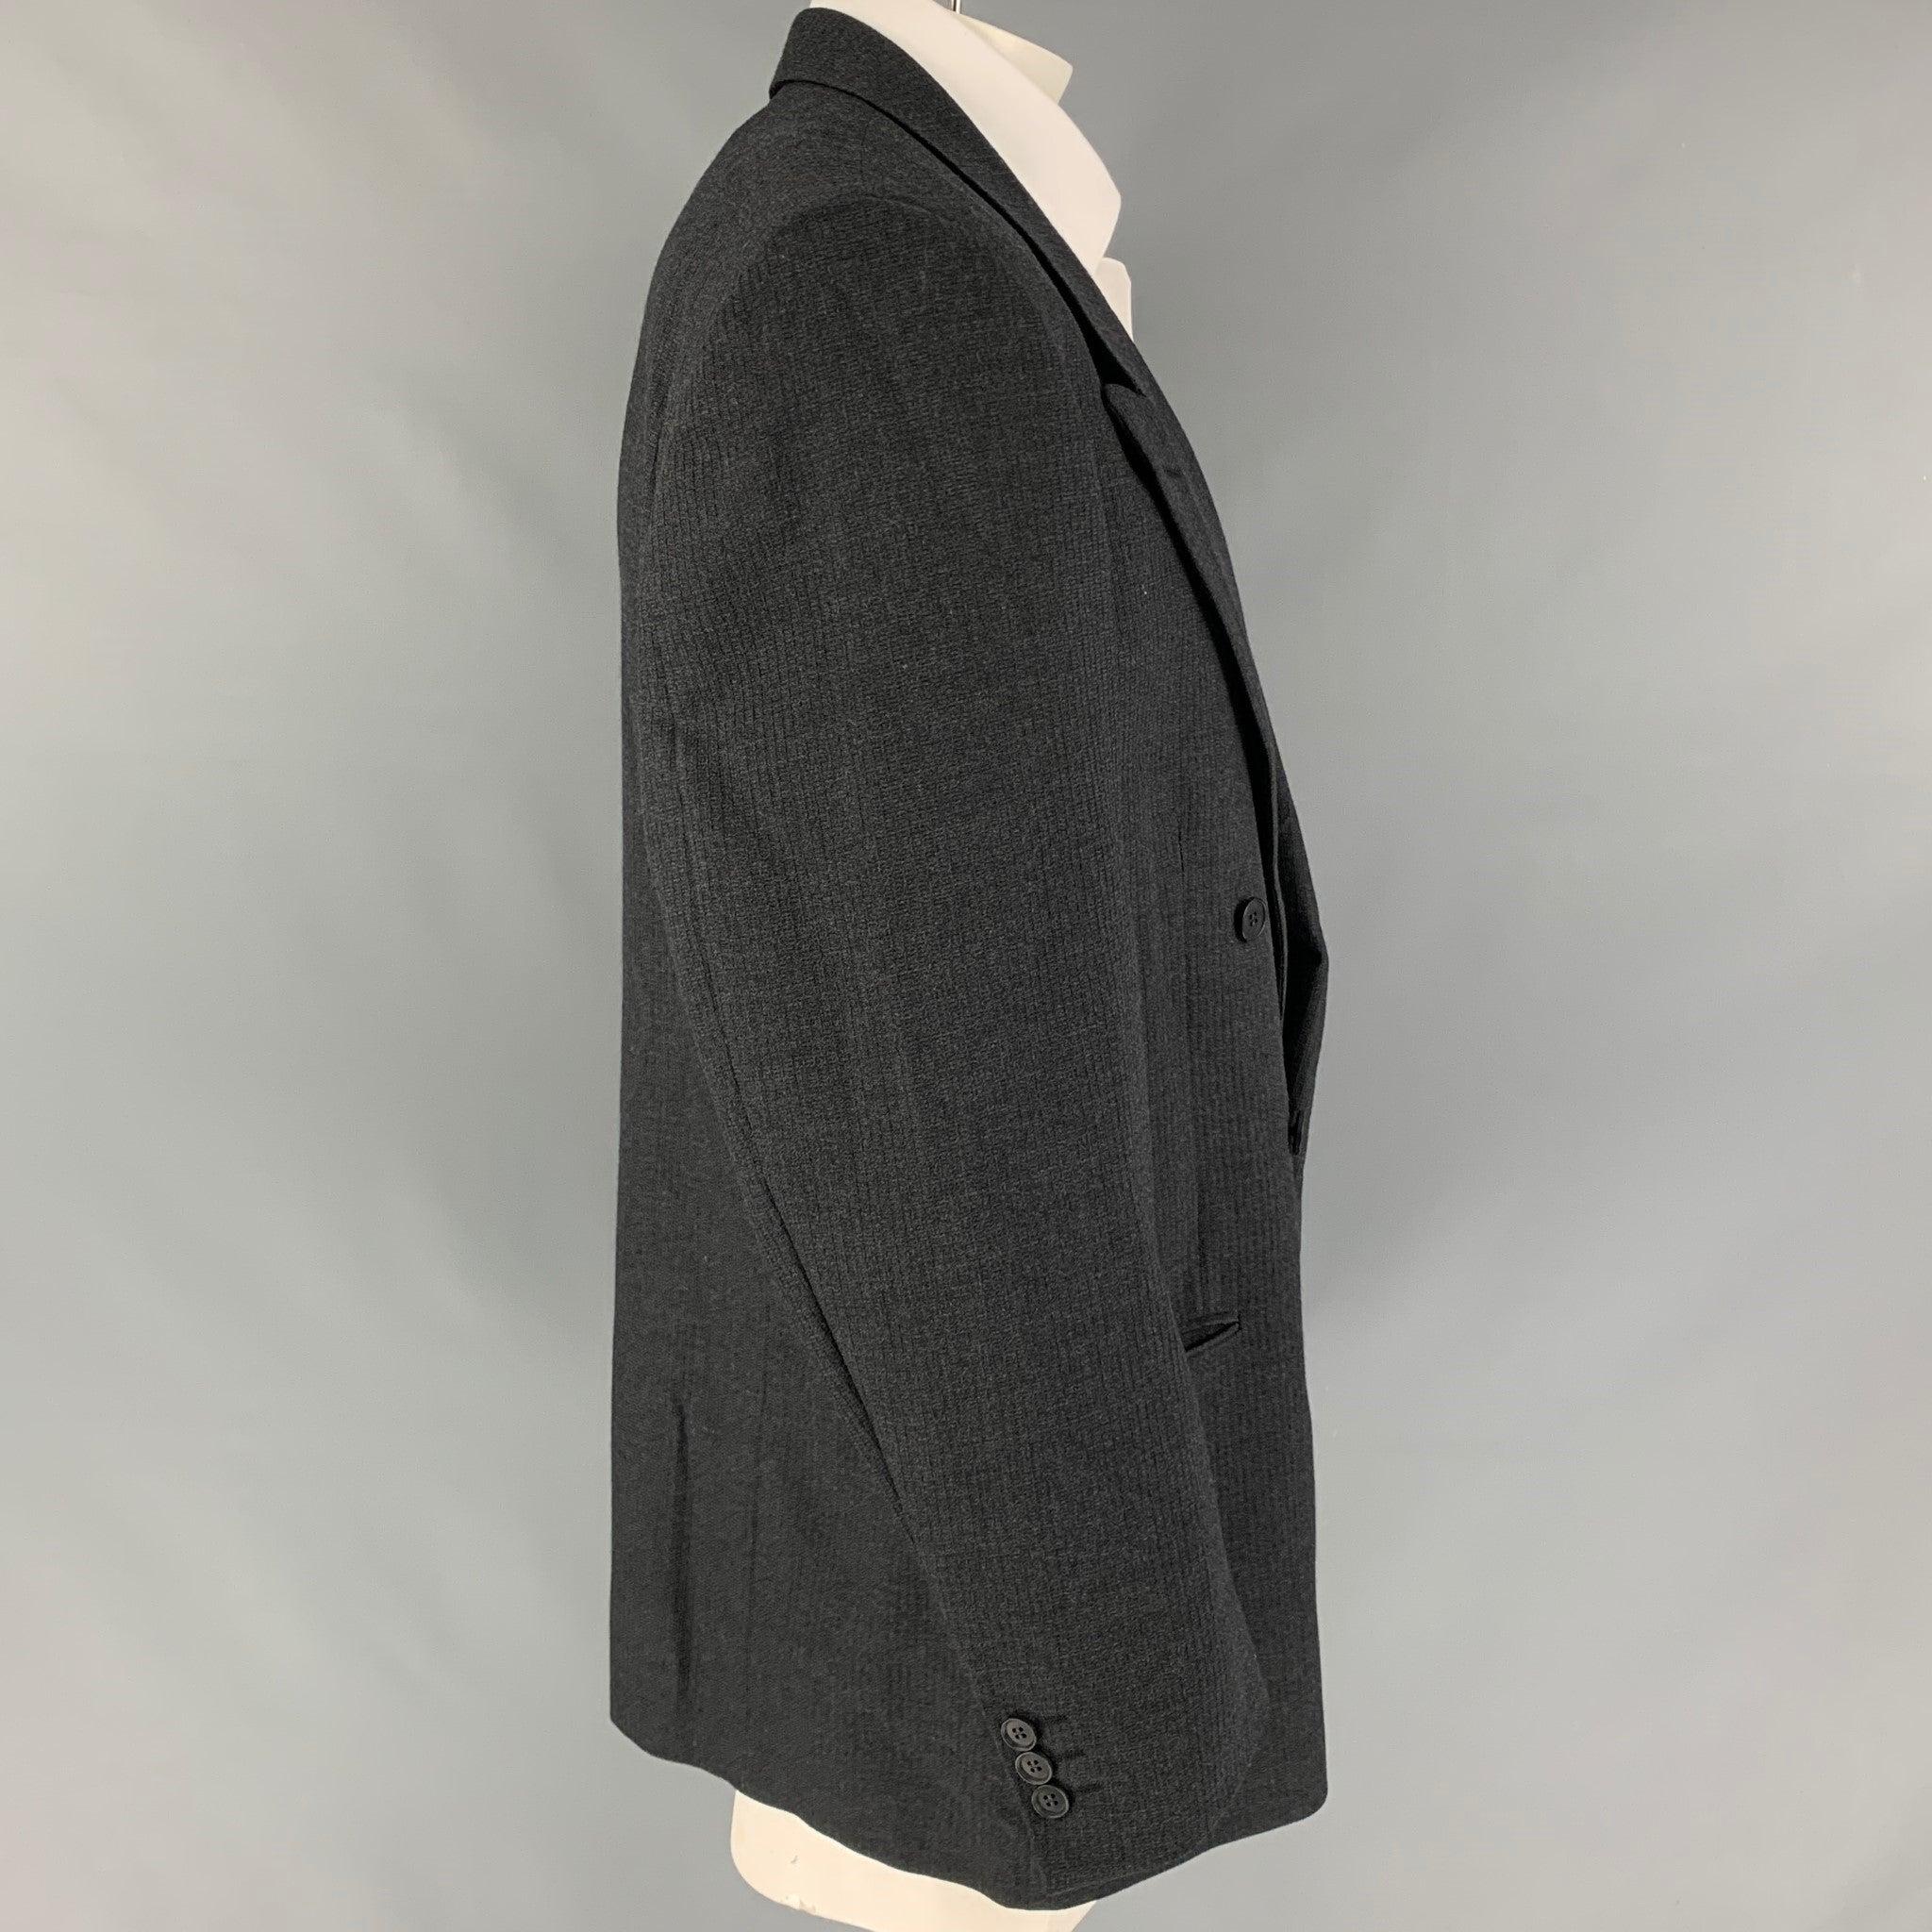 Vintage YVES SAINT LAURENT sport coat comes in a dark gray textured wool with a full monogram liner featuring a peak lapel, slit pockets, and a double breasted closure. Made in Canada.
Very Good
Pre-Owned Condition. 

Marked:   Fabric tag removed 